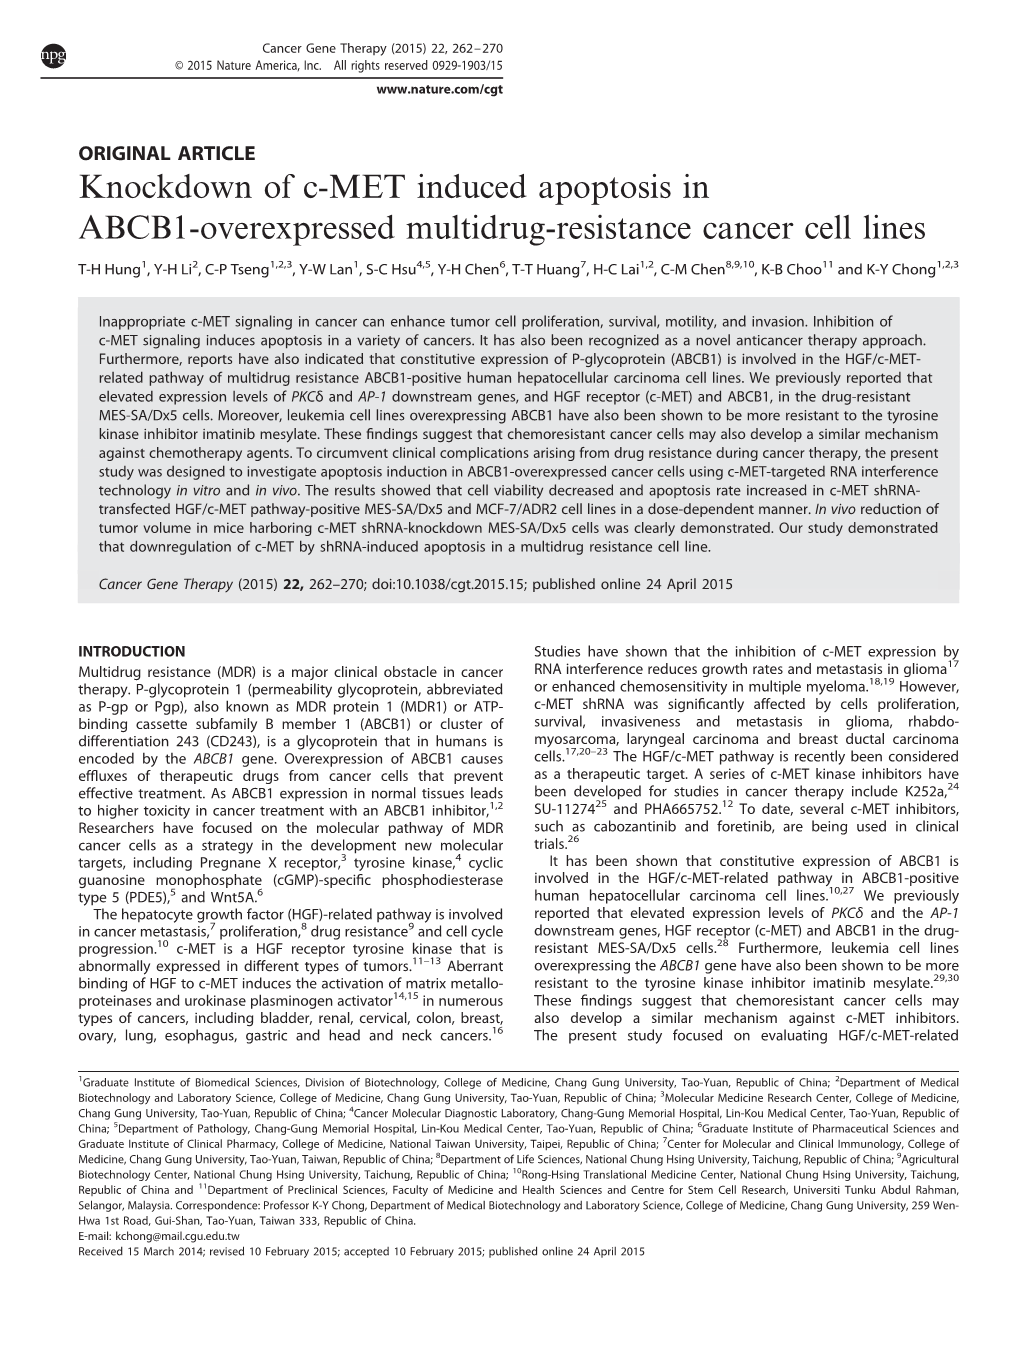 Knockdown of C-MET Induced Apoptosis in ABCB1-Overexpressed Multidrug-Resistance Cancer Cell Lines